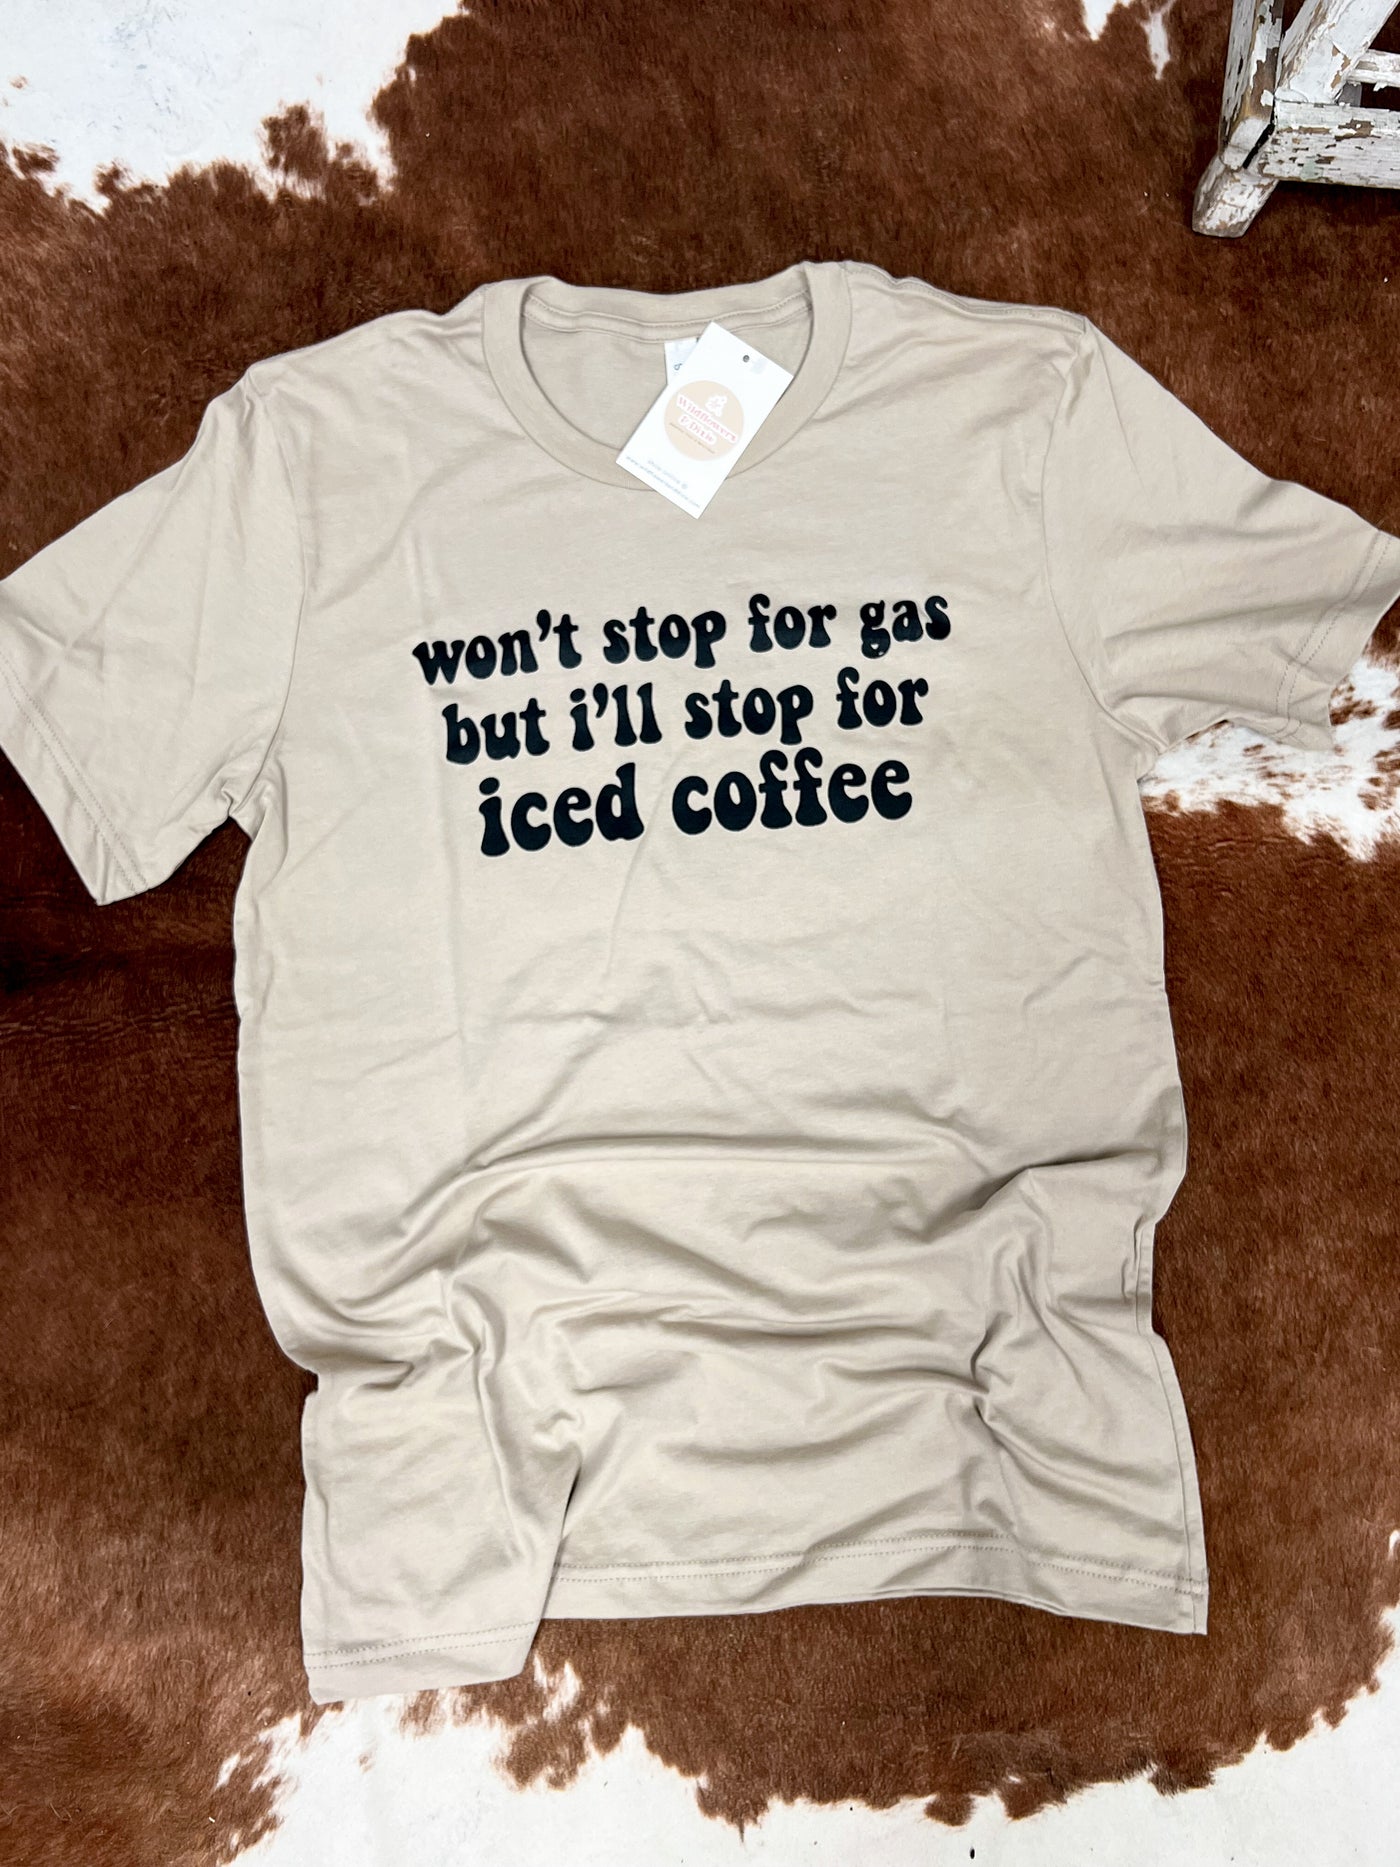 CLEARANCE "Won't Stop for Gas but I'll Stop for Iced Coffee" T-shirt